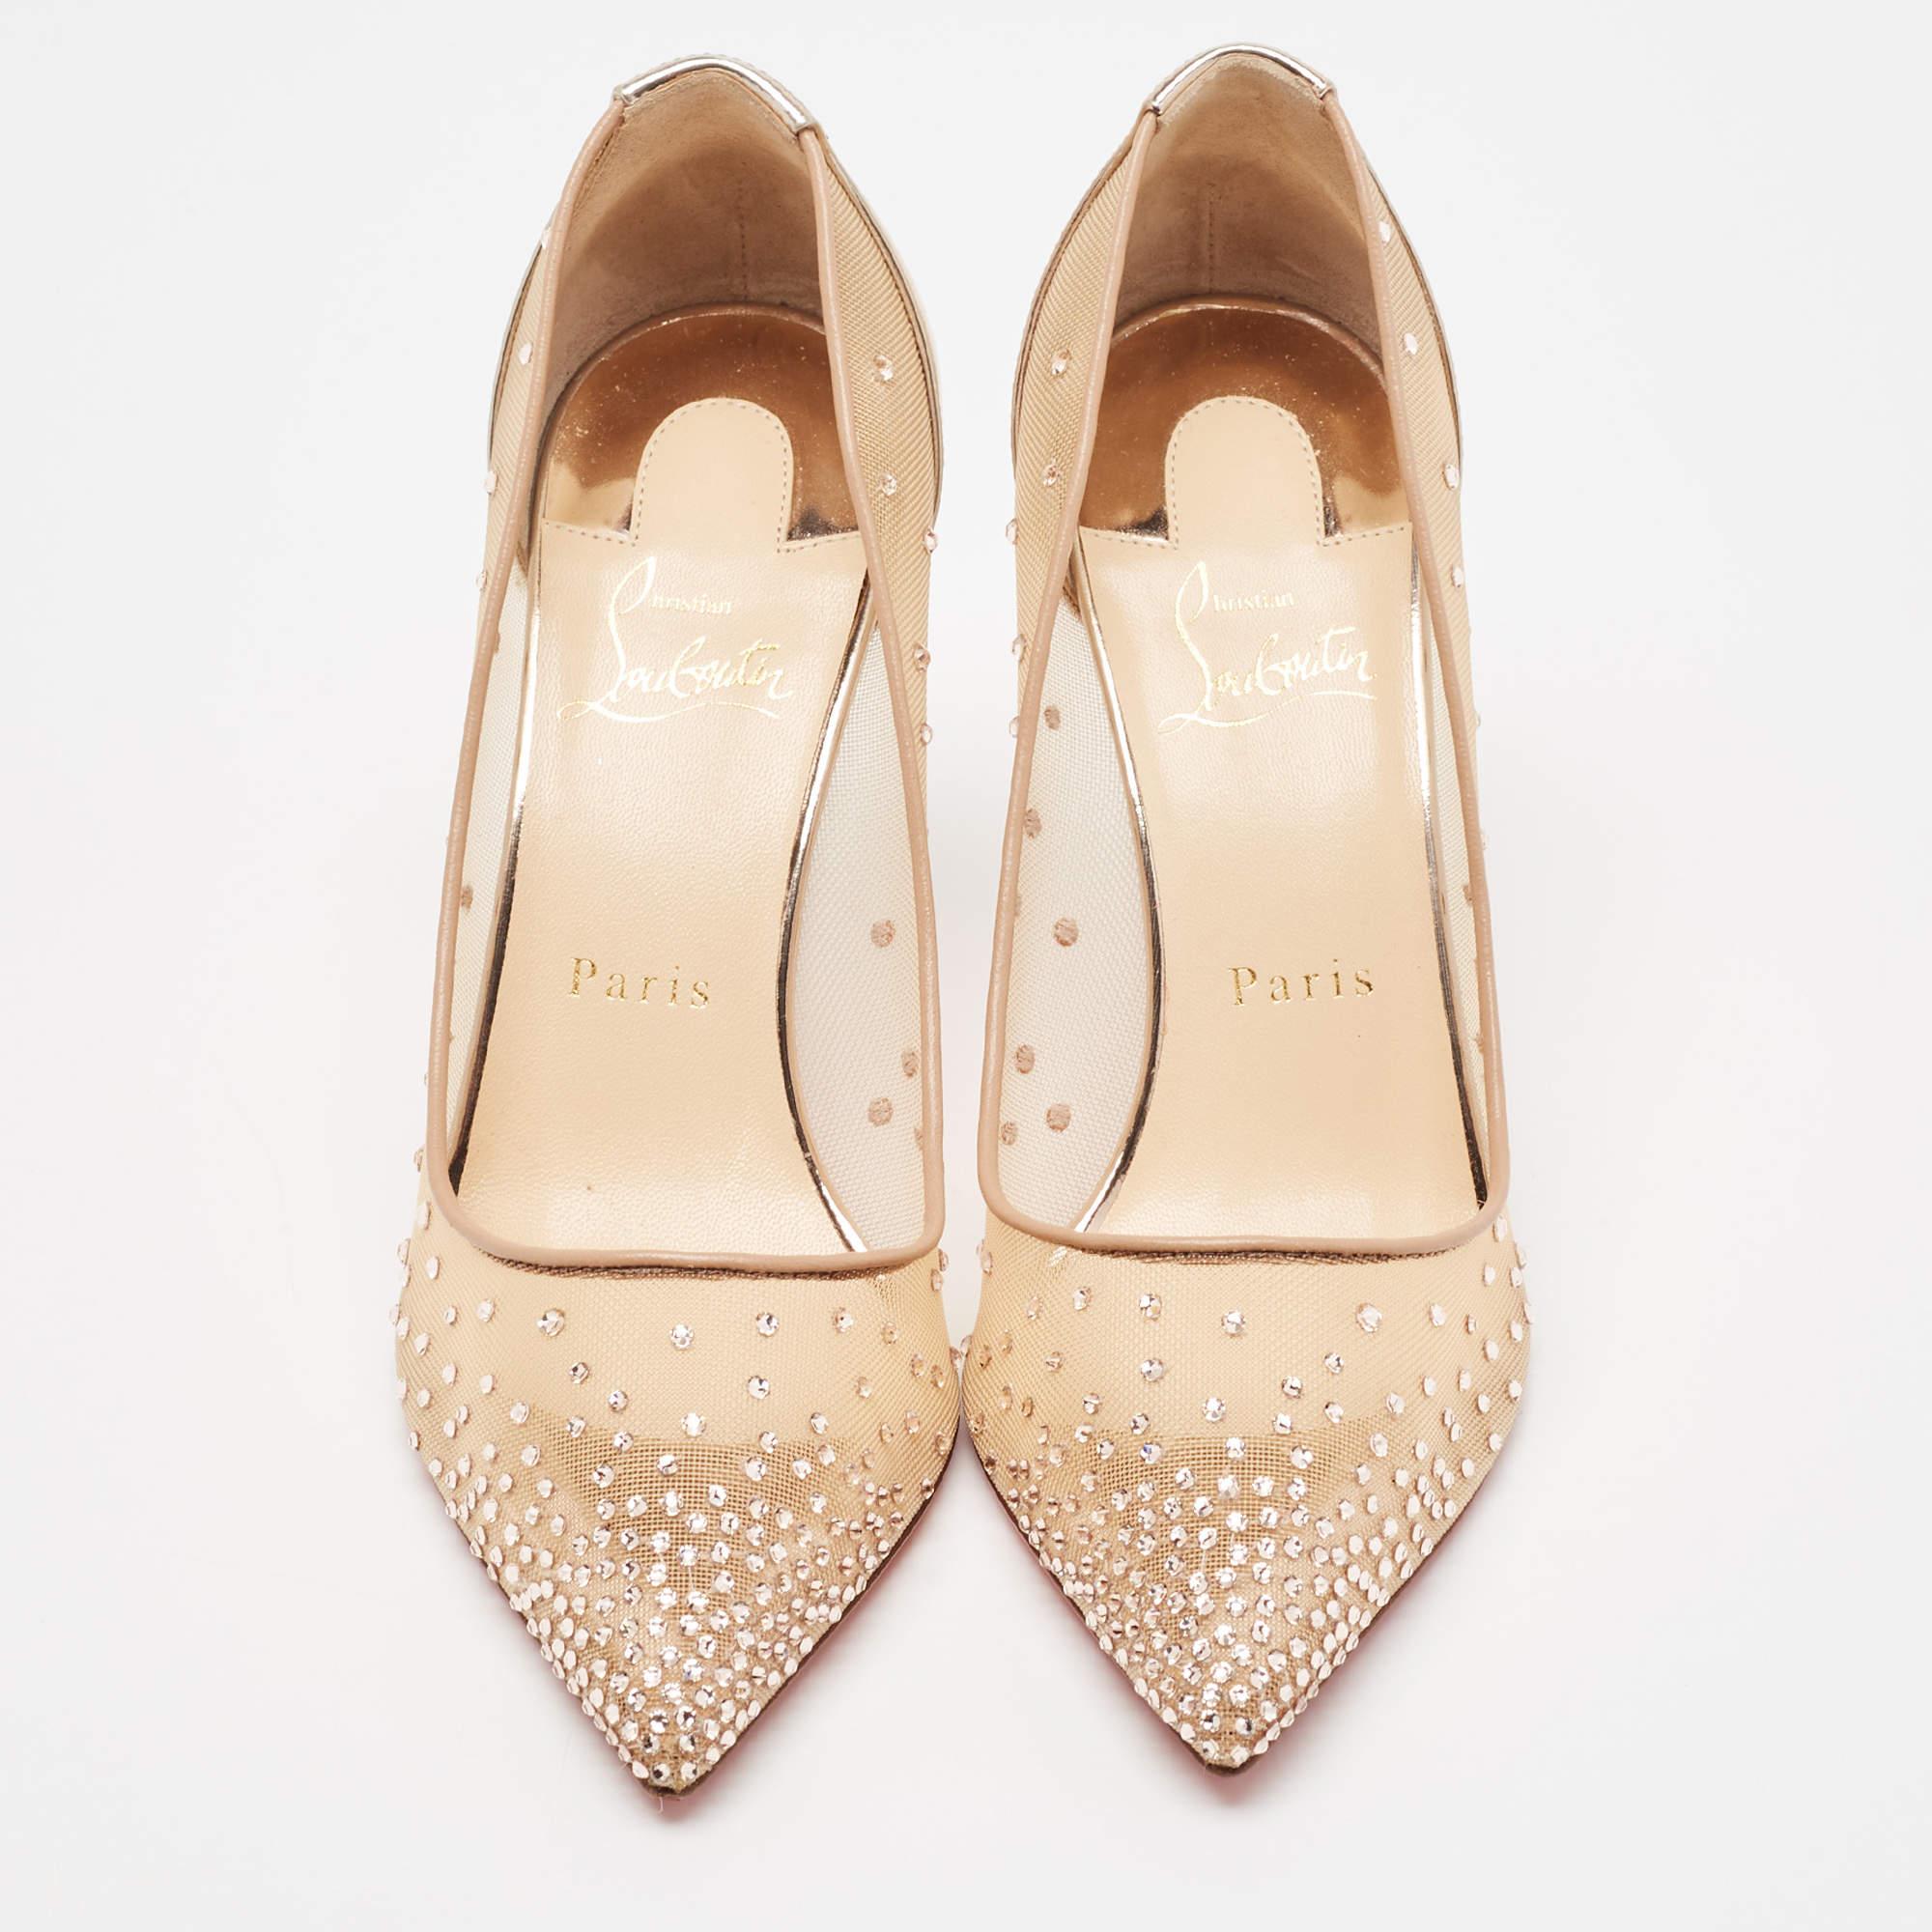 Christian Louboutin Gold Mesh and Leather Follies Pumps Size 38 1